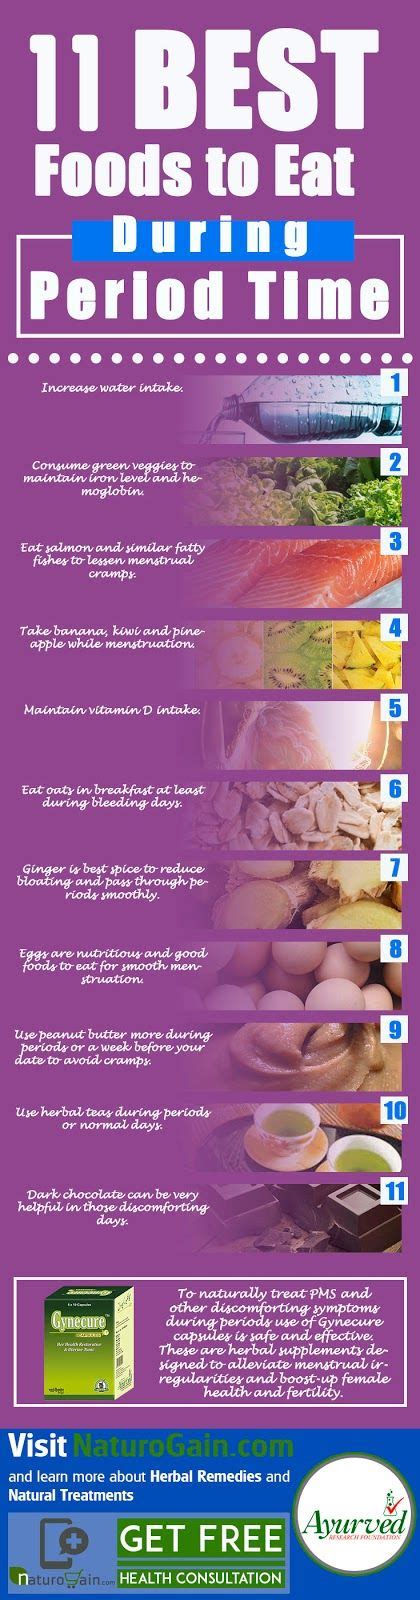 11 best foods to eat during period time infographic good foods to eat foods to eat herbal